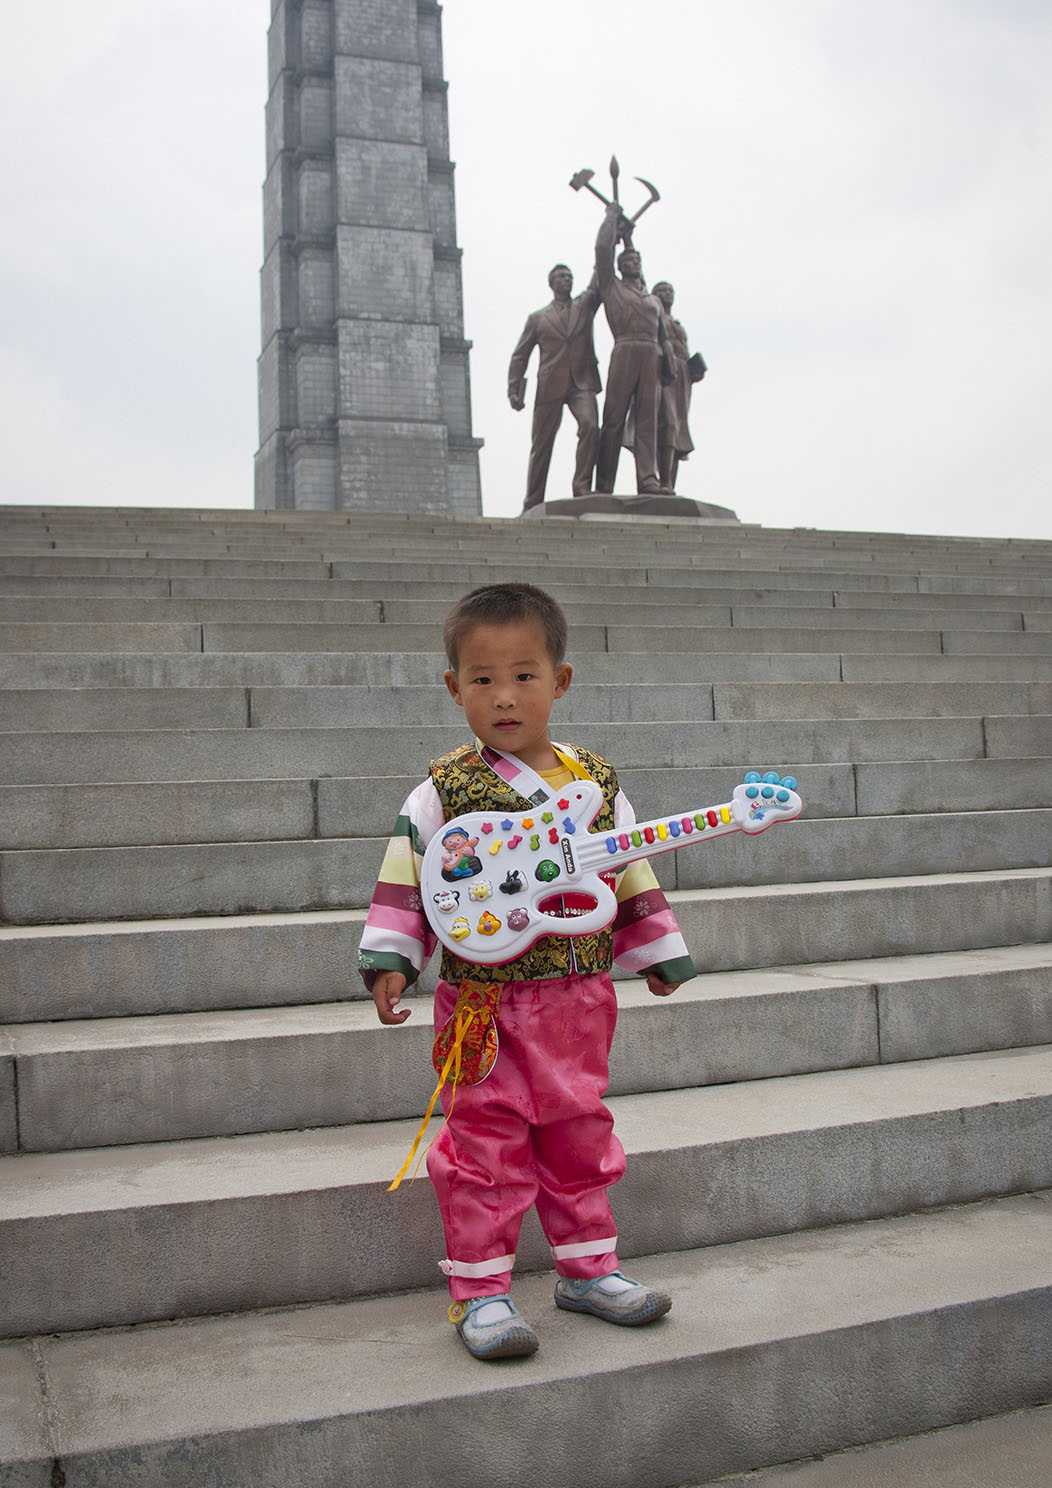 Young Boy With Toy Guitar On Stairs In Front Of Juche Tower, Pyongyang, North Korea